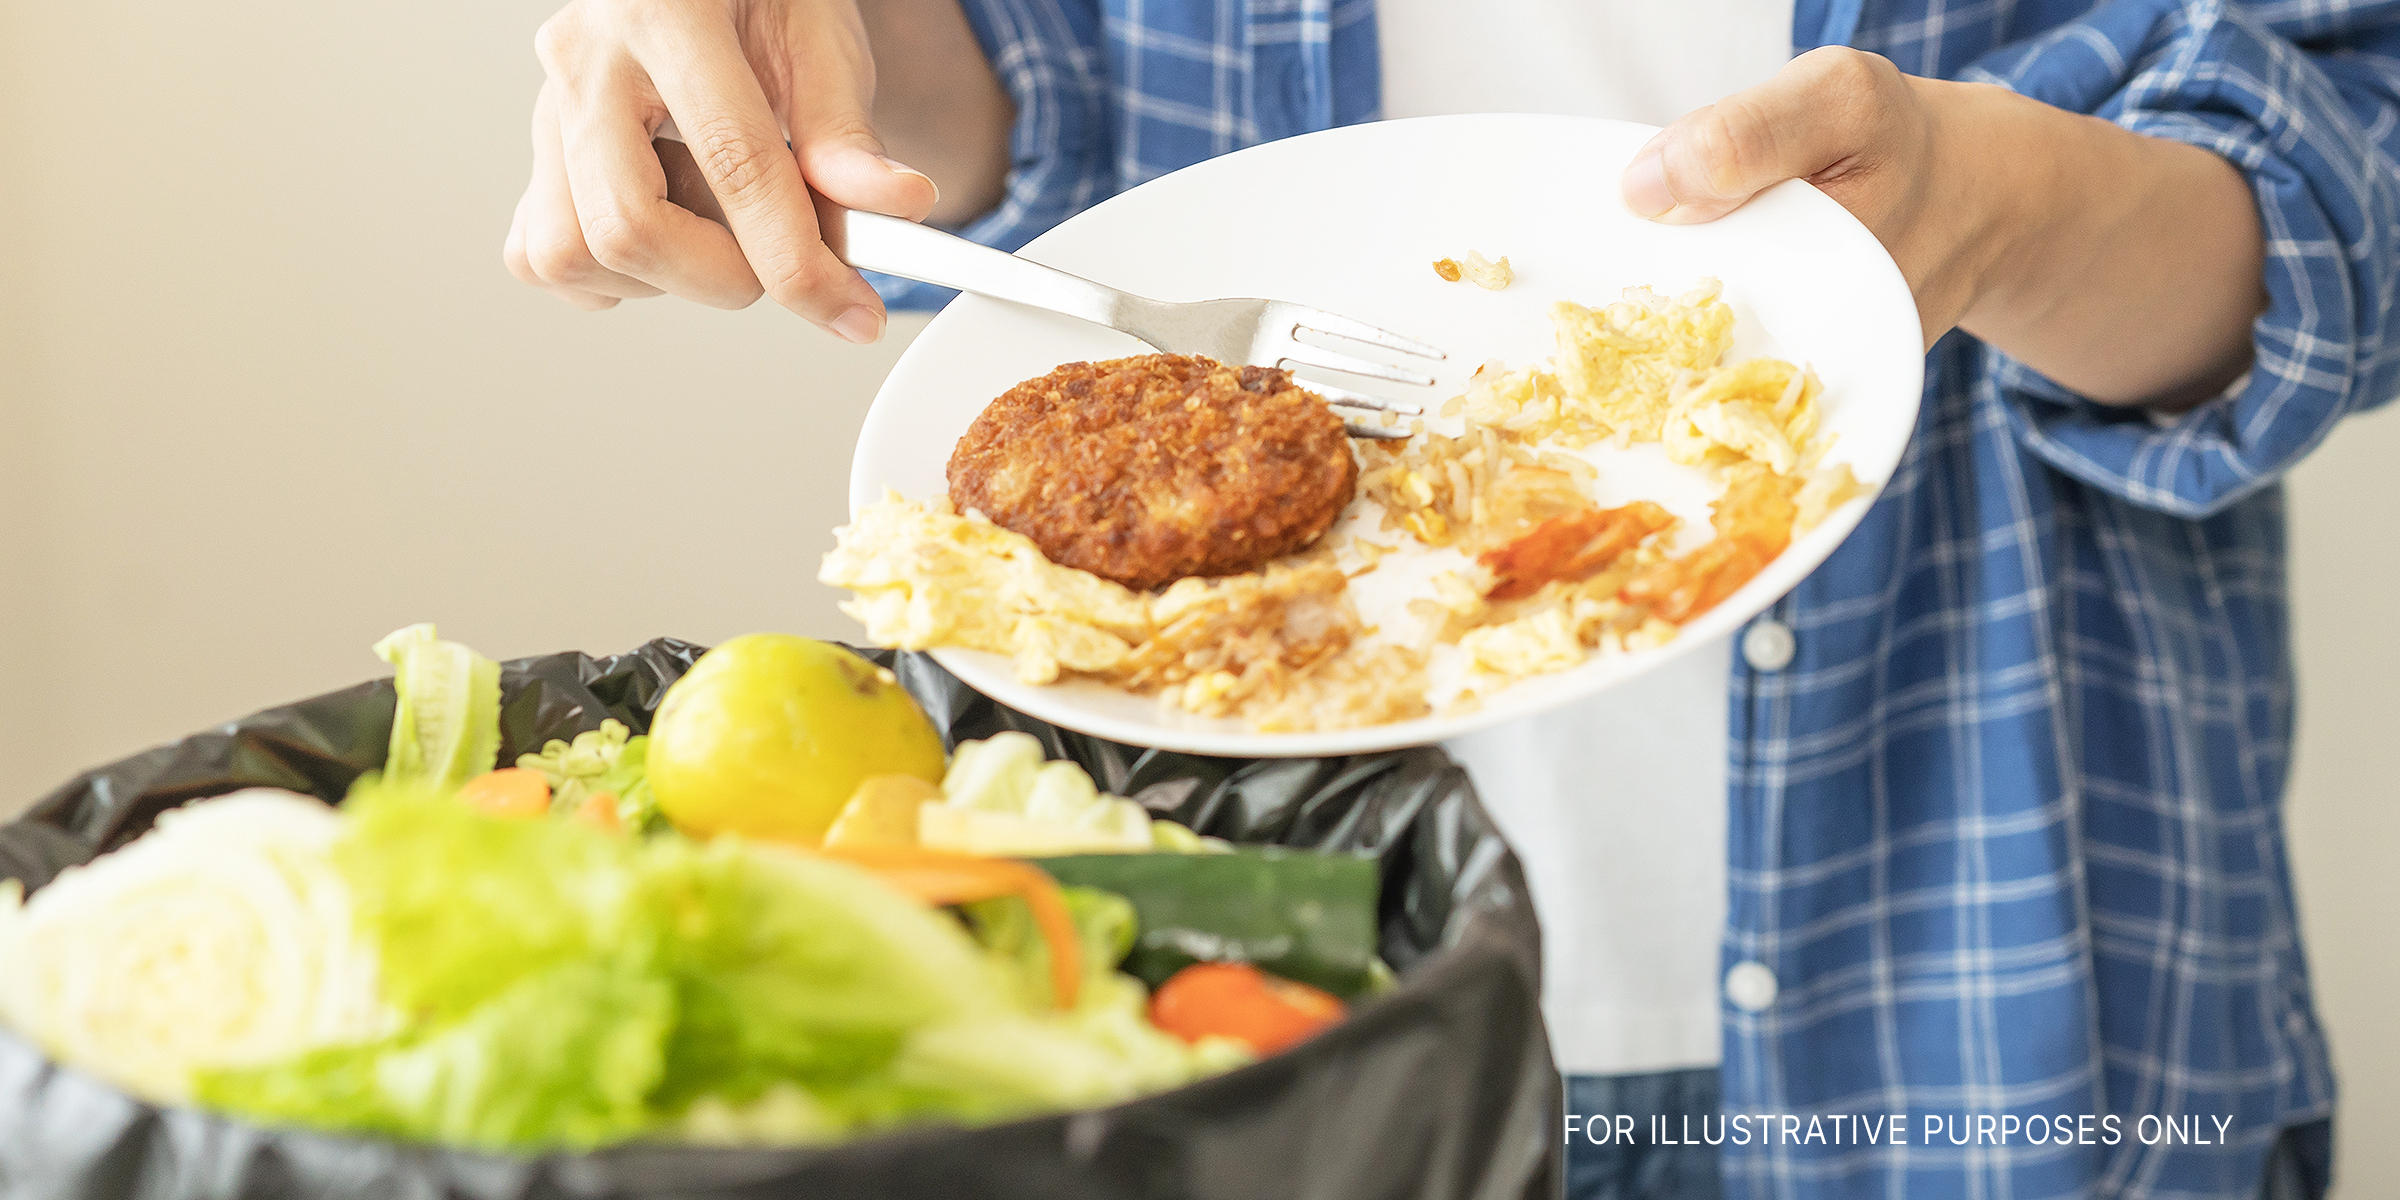 Person throwing food to the trash | Source: Shutterstock